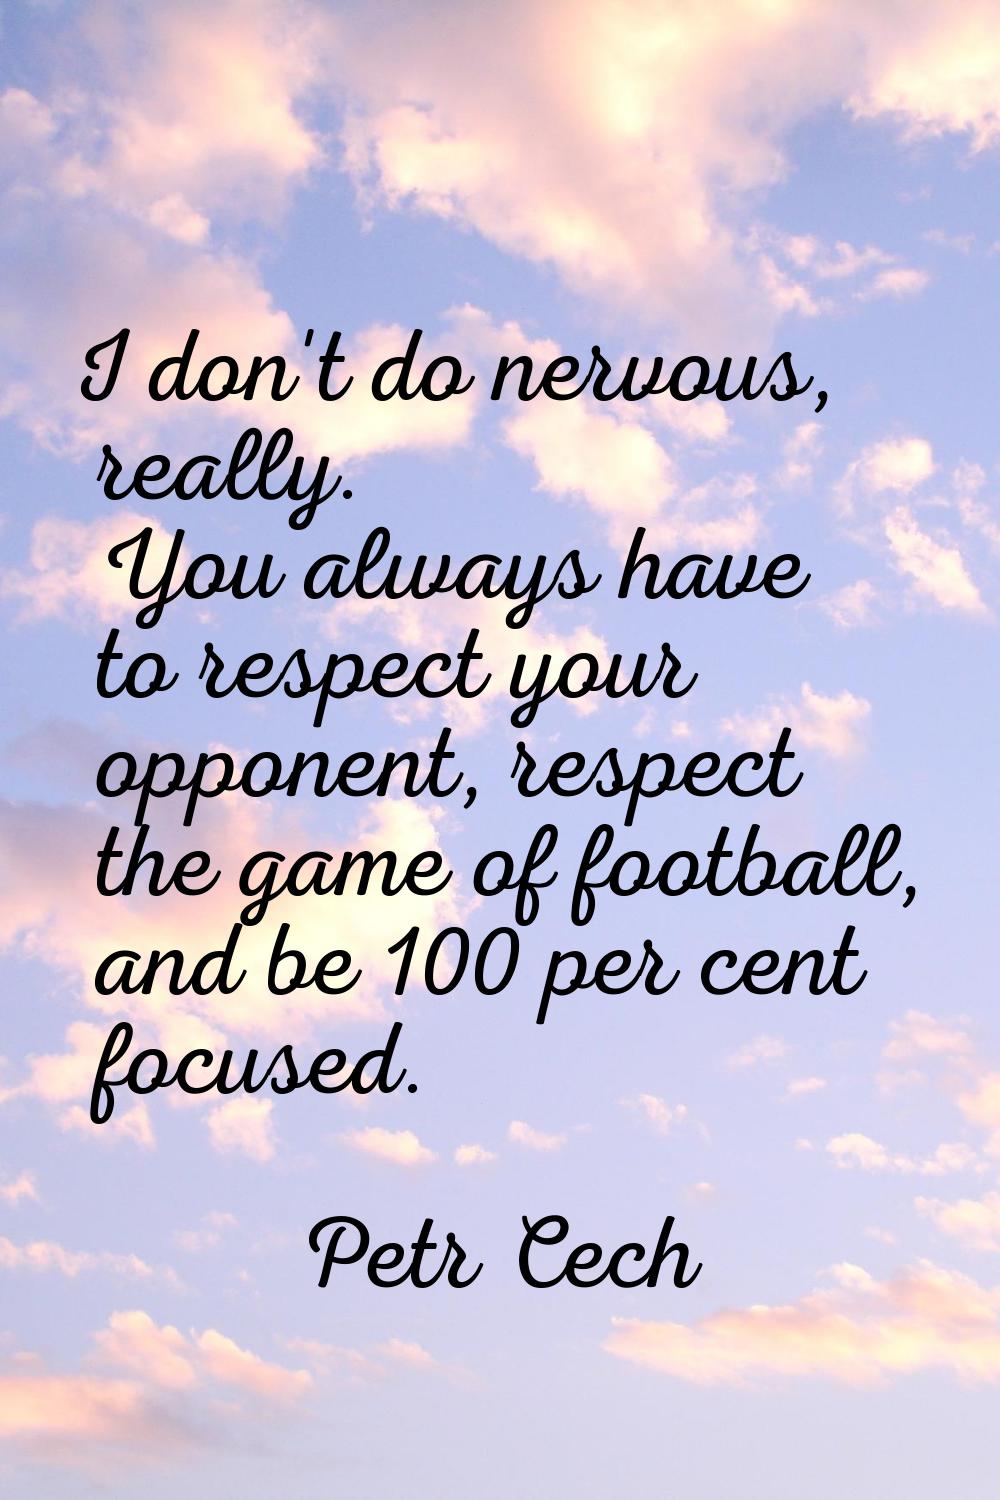 I don't do nervous, really. You always have to respect your opponent, respect the game of football,